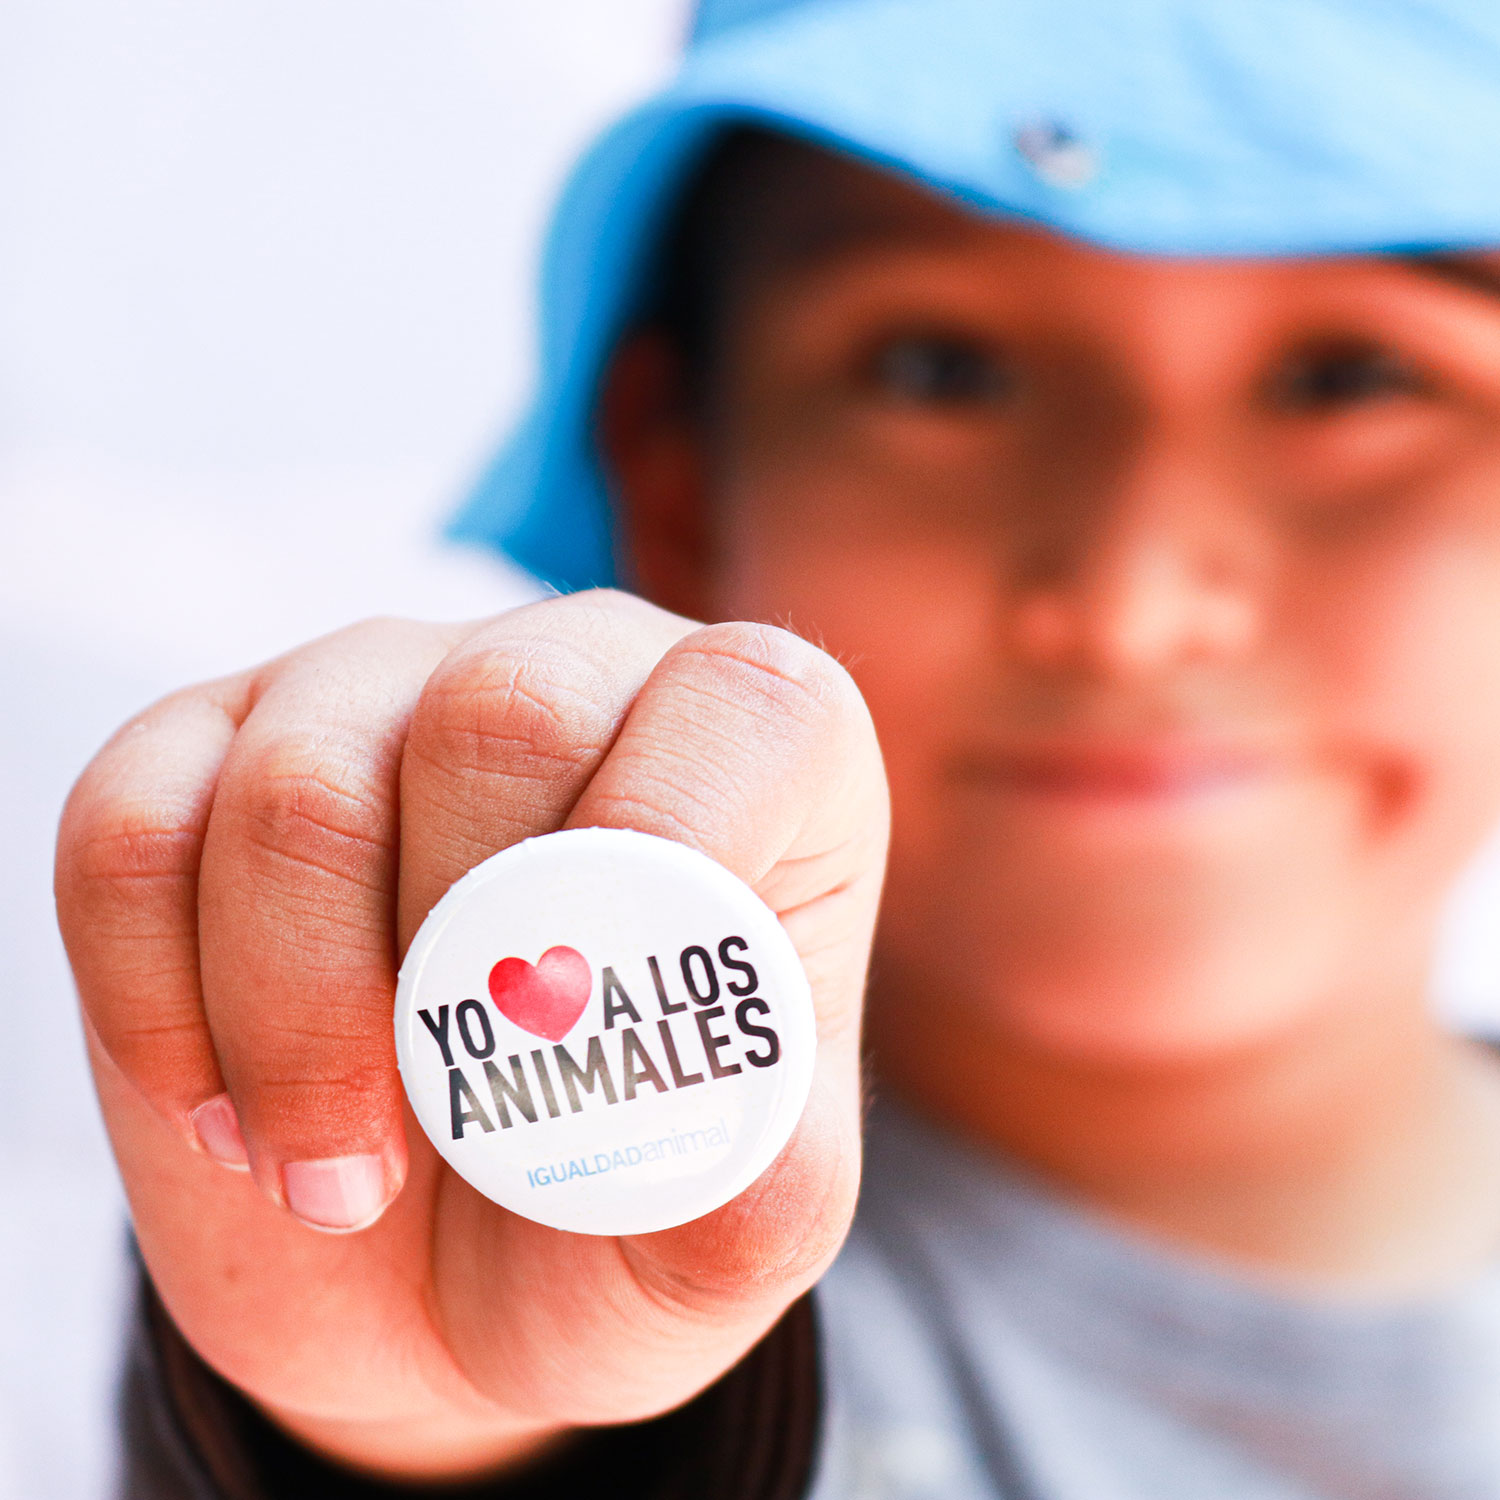 Boy holding a pin that says "I love all animals" in Spanish